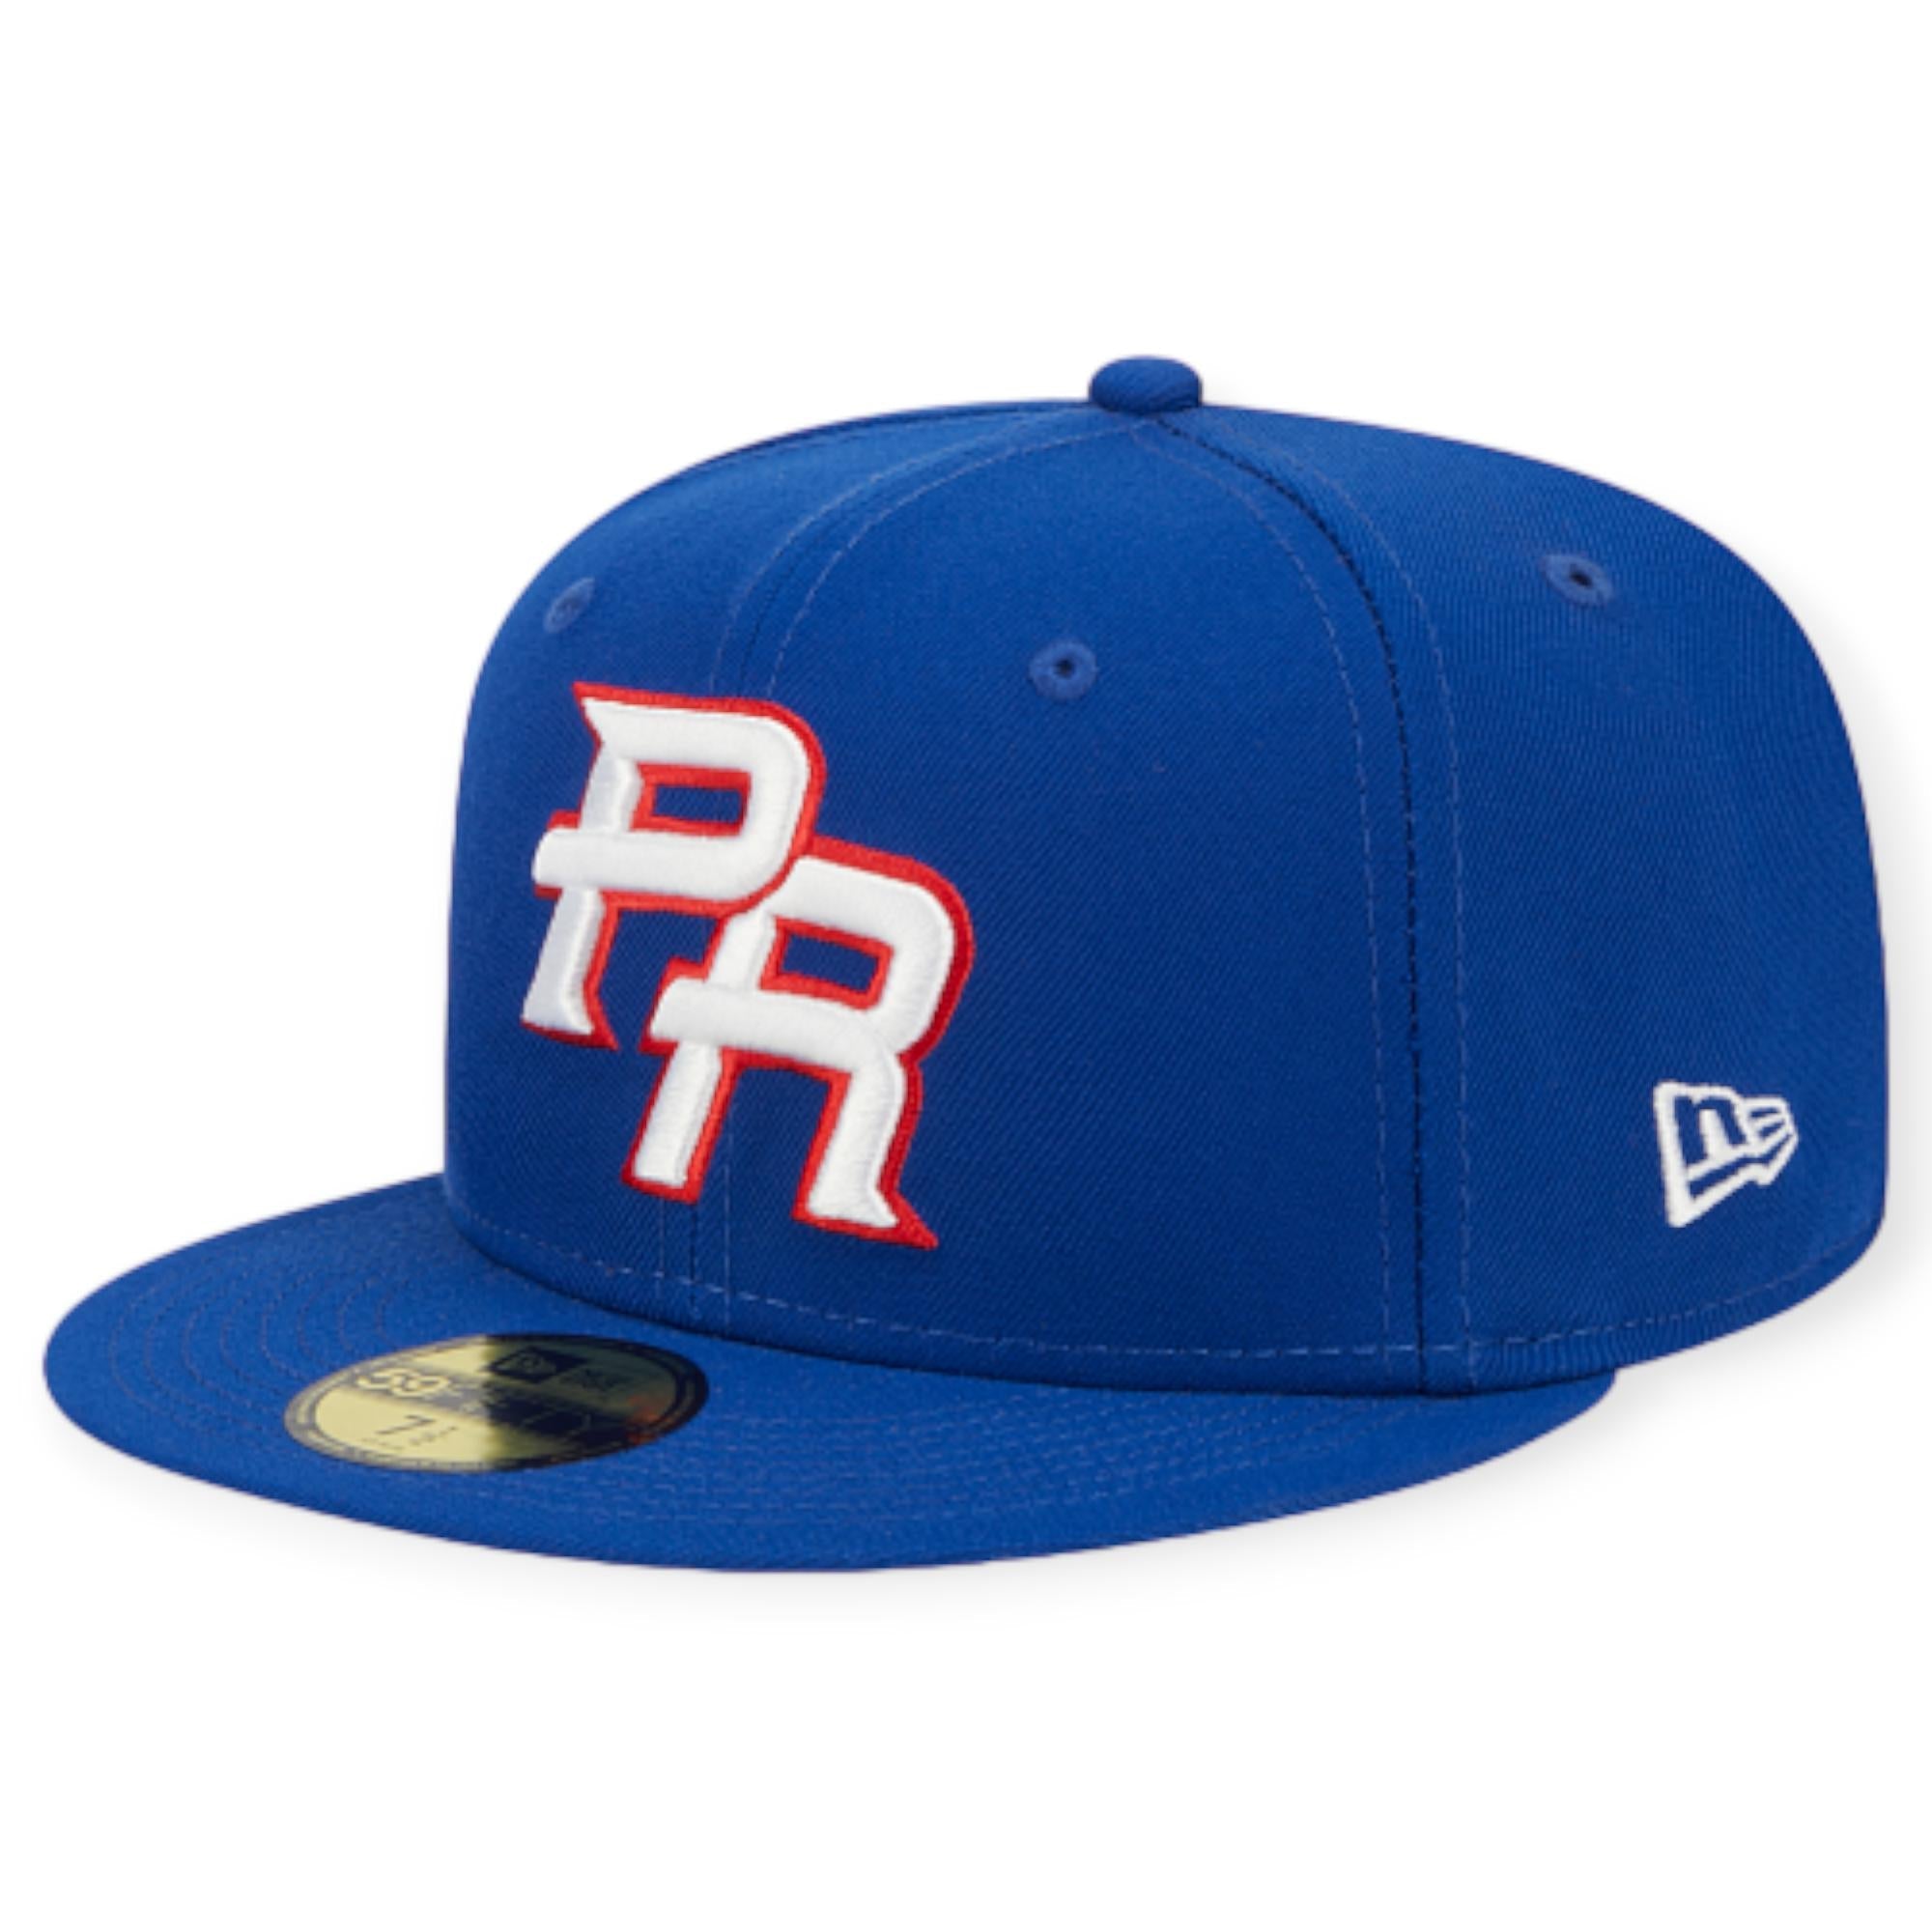 New Era Puerto Rico World Baseball Classic 59FIFTY Fitted Hat (Blue)